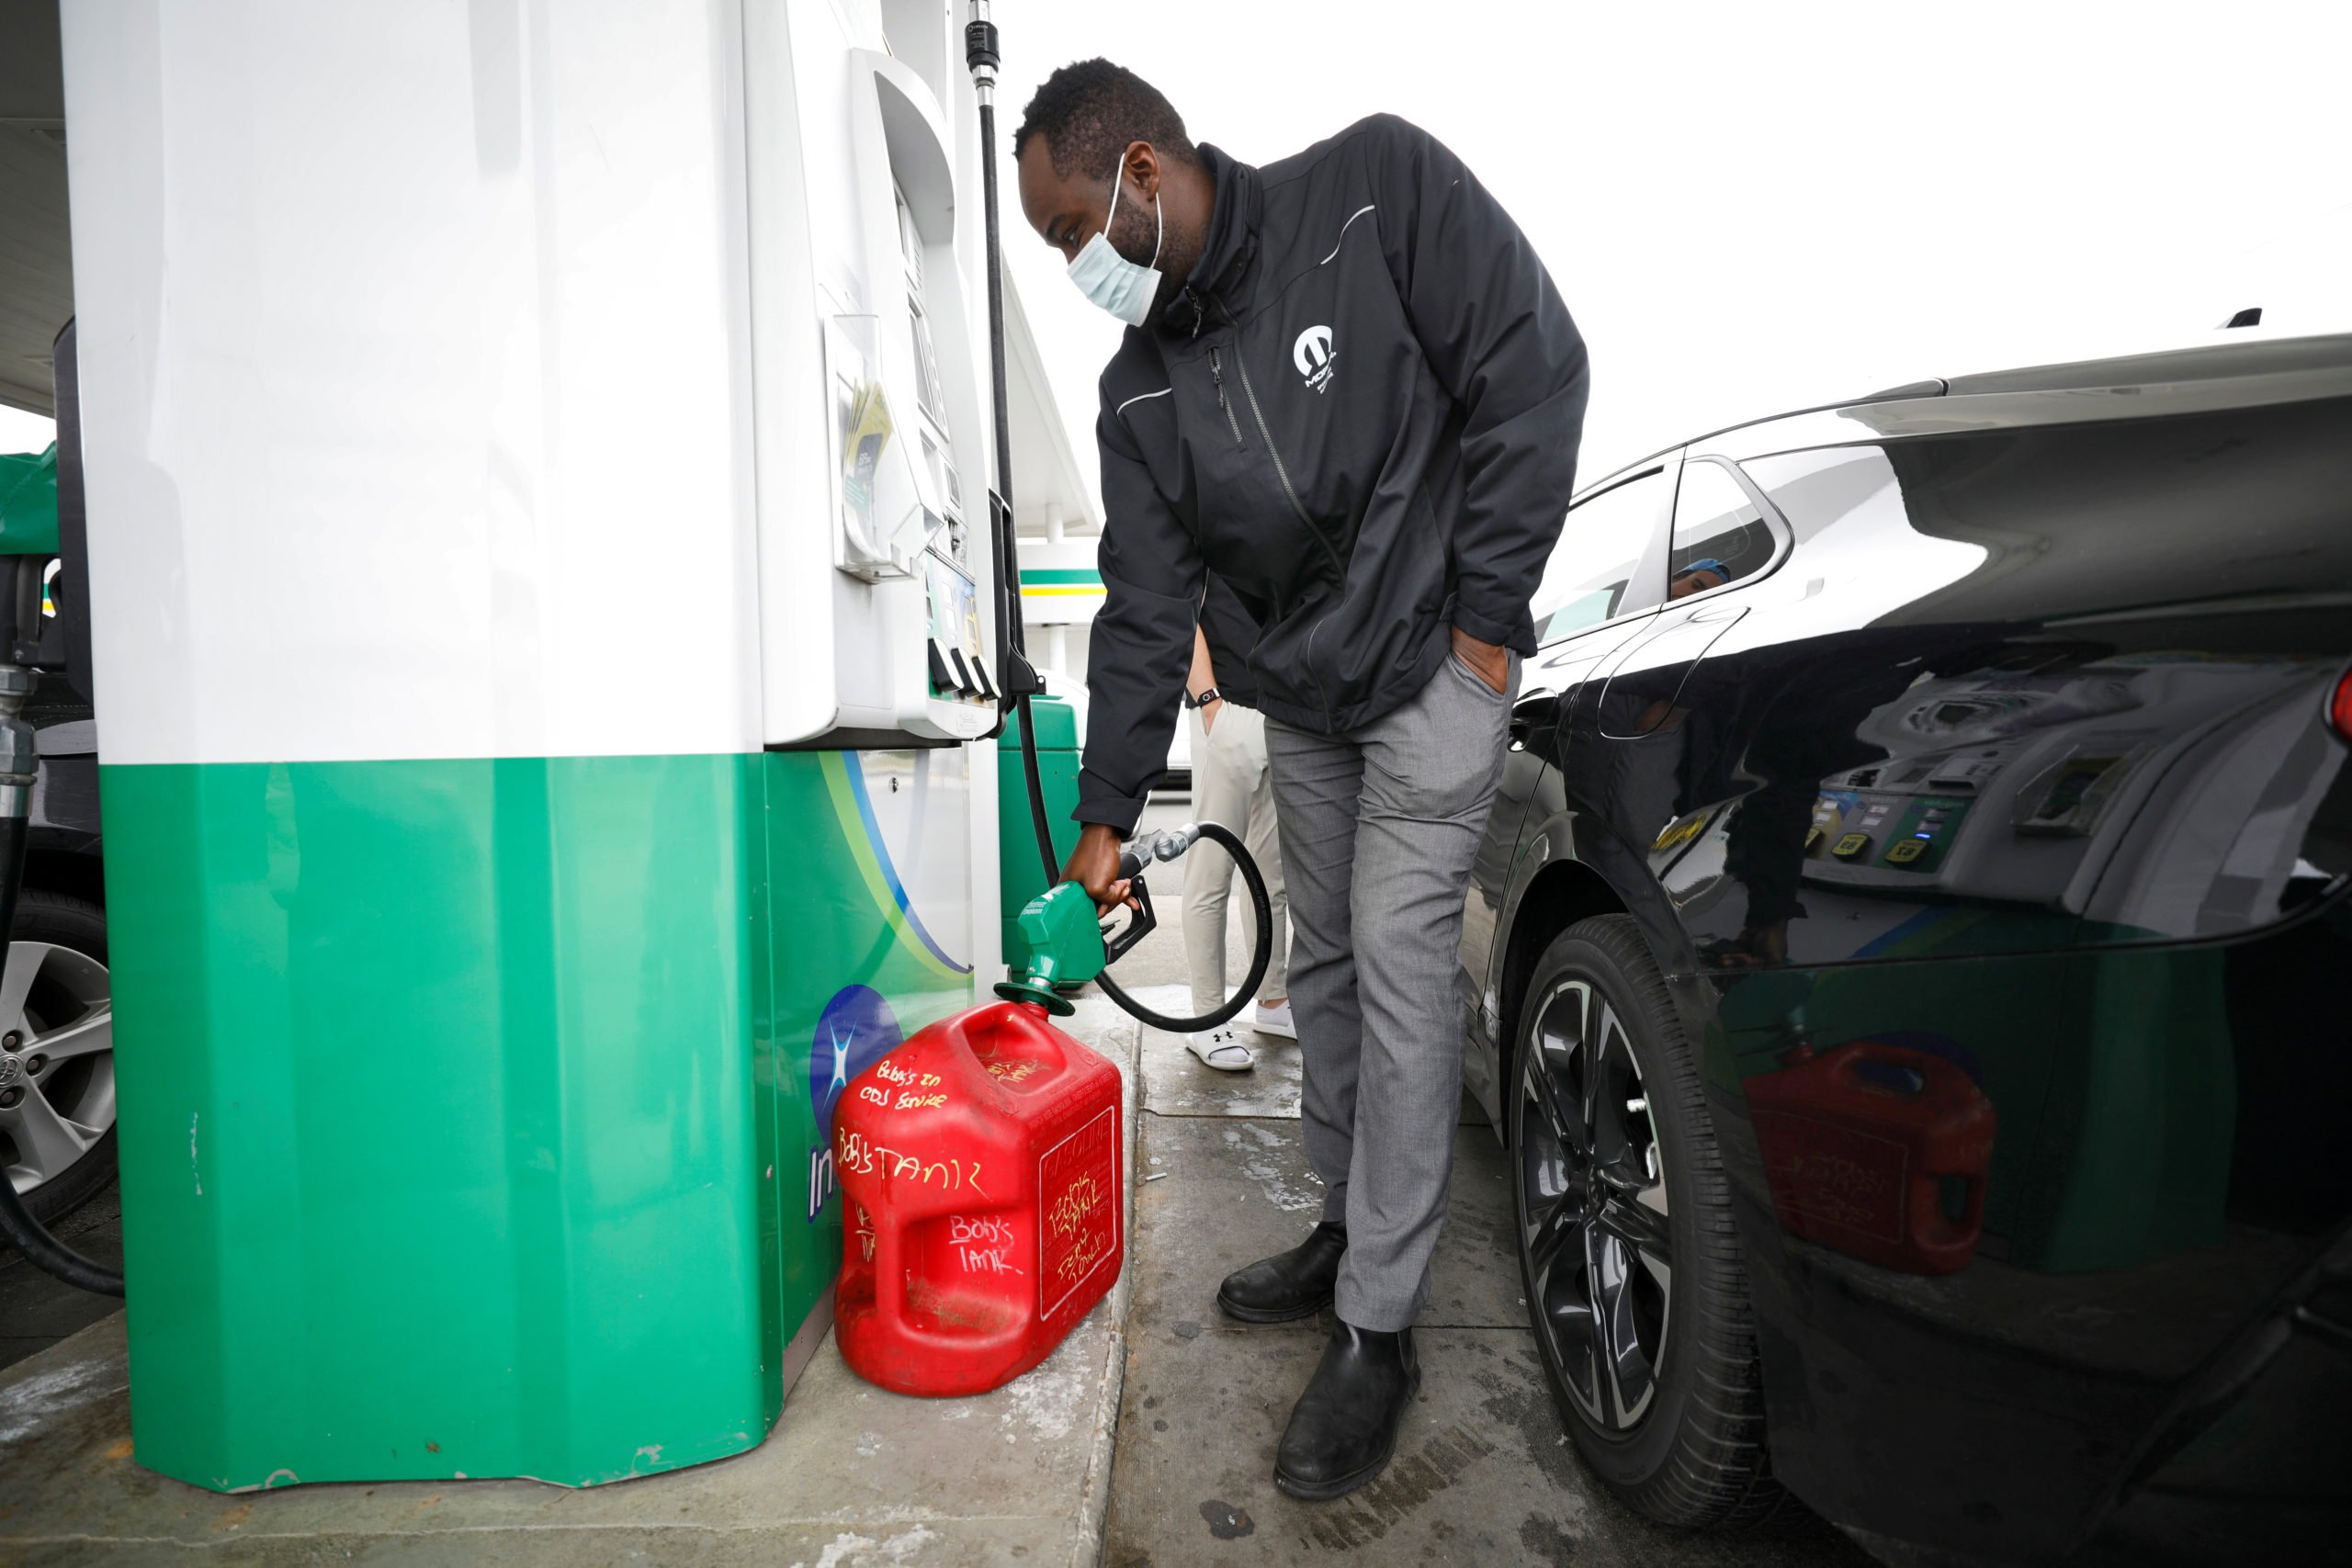 A local resident fills up a portable gas container as demand for gasoline surges following the cyberattack that crippled the Colonial Pipeline, in Durham, North Carolina, U.S. May 12, 2021. (REUTERS/Jonathan Drake)